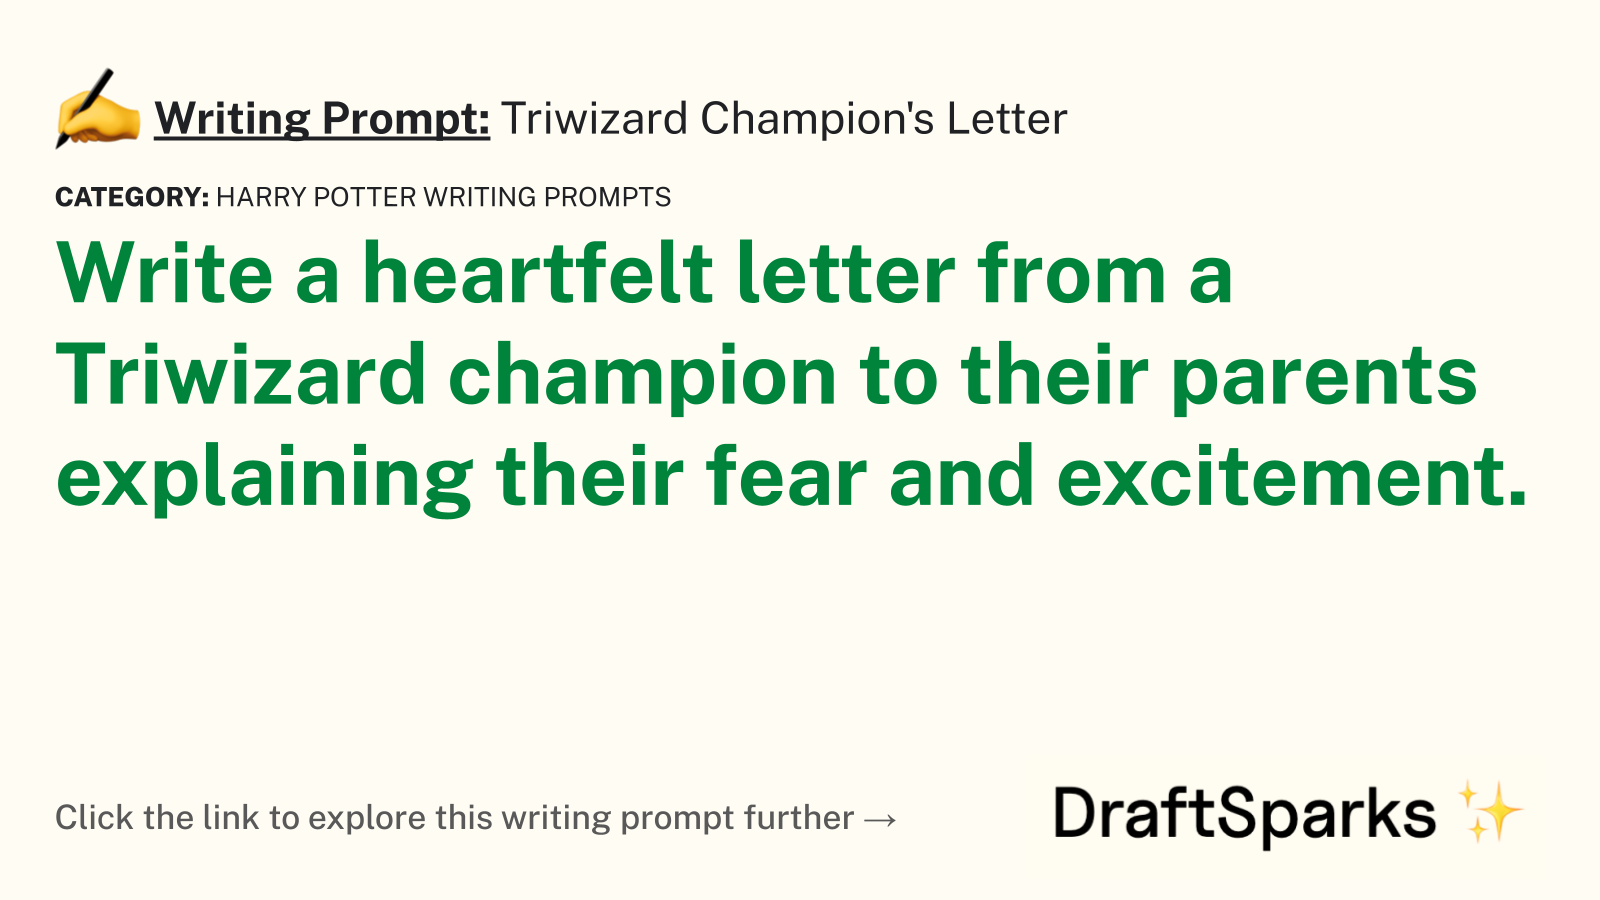 Triwizard Champion’s Letter